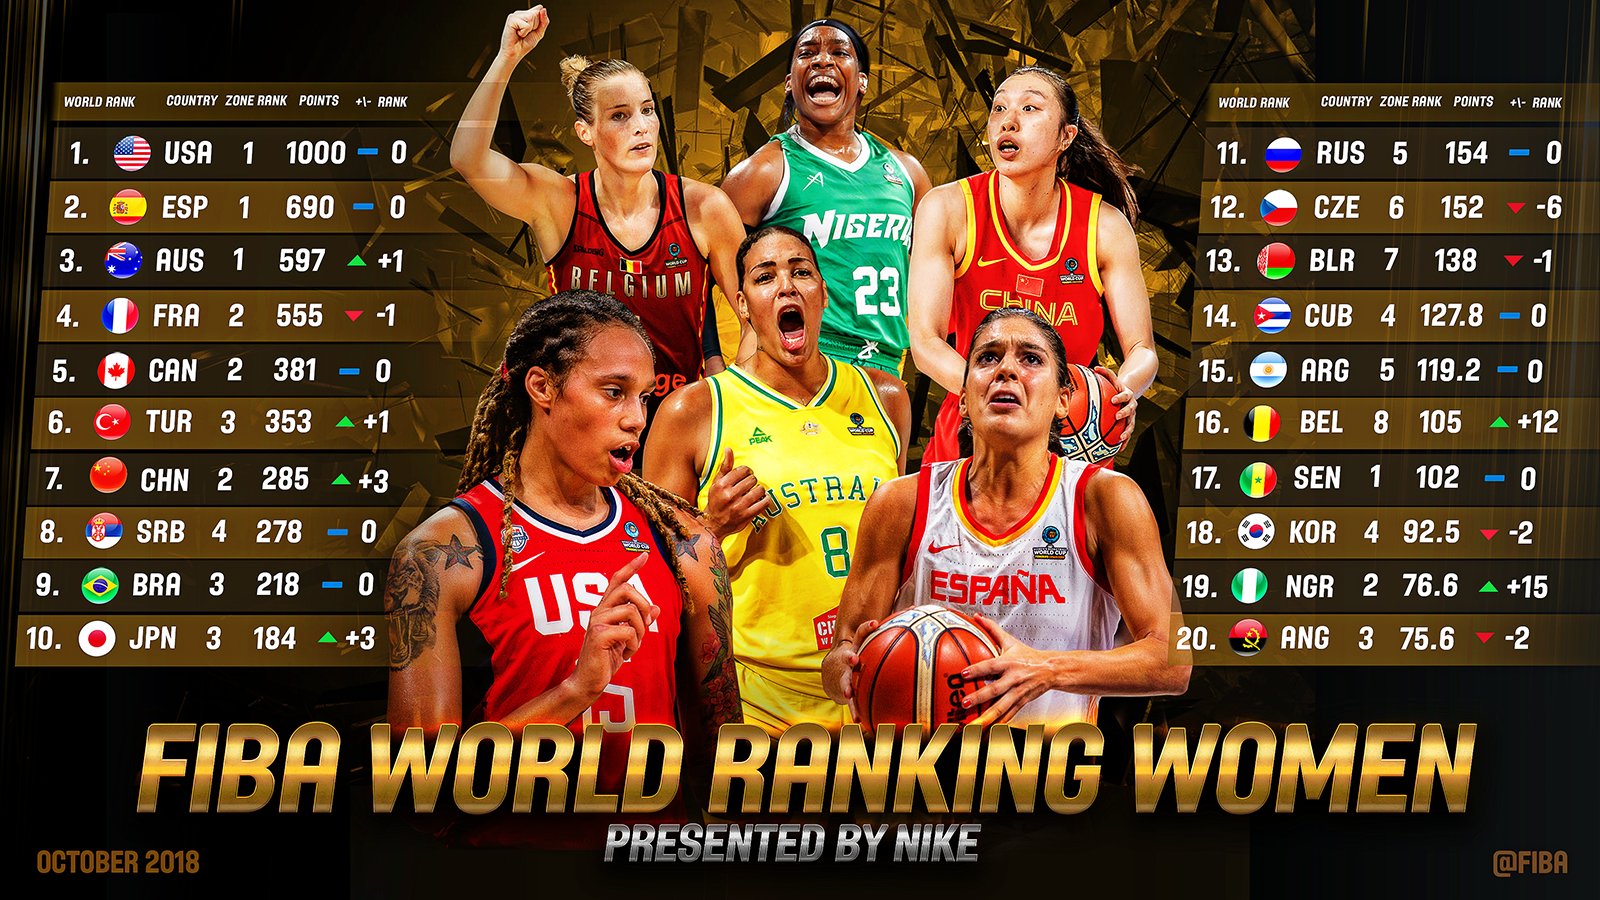 FIBA on Twitter "🇺🇸 and 🇪🇸 were joined by 🇦🇺 at the top of the FIBA